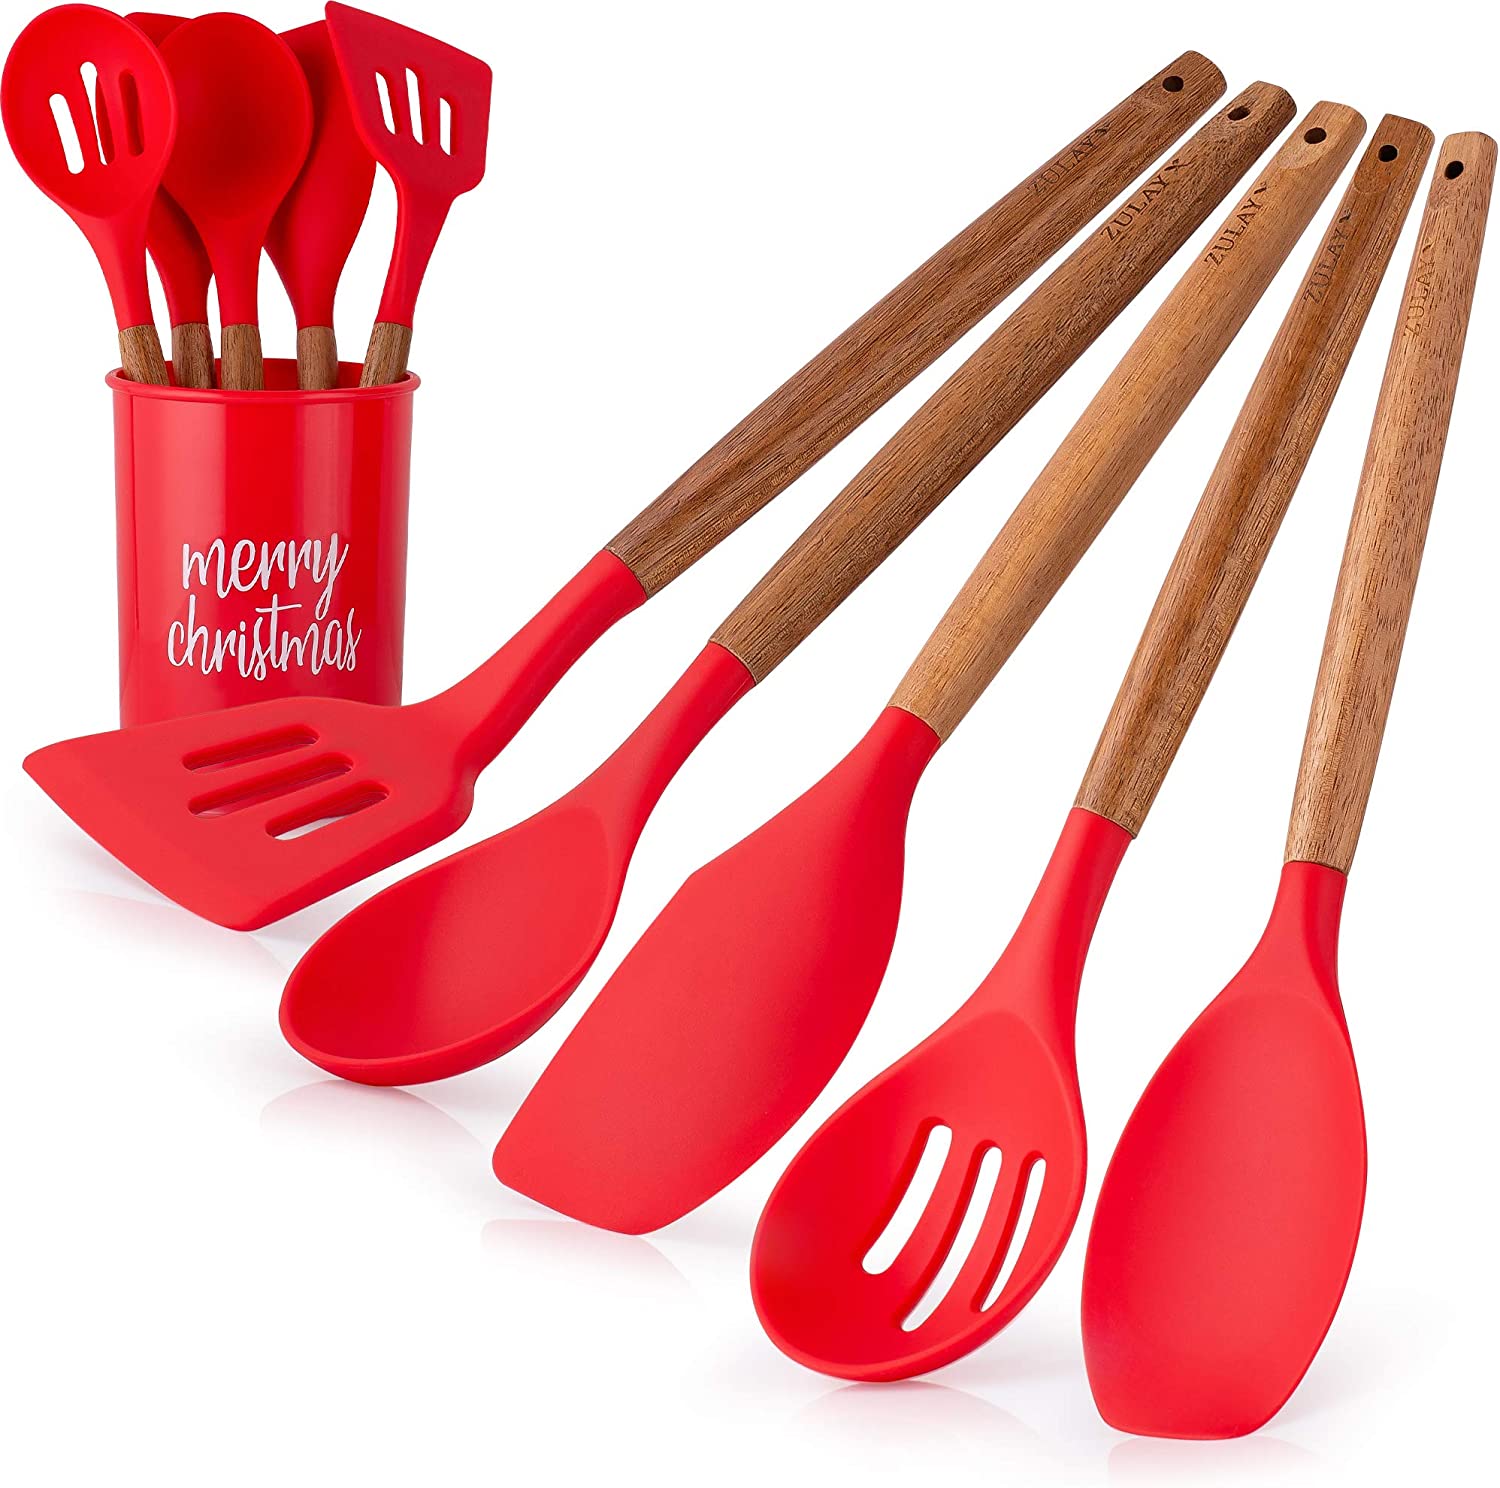 Zulay Kitchen Non-Stick Silicone Utensils Set (5-Piece) with Authentic Acacia Wood Handles & Utensil Holder